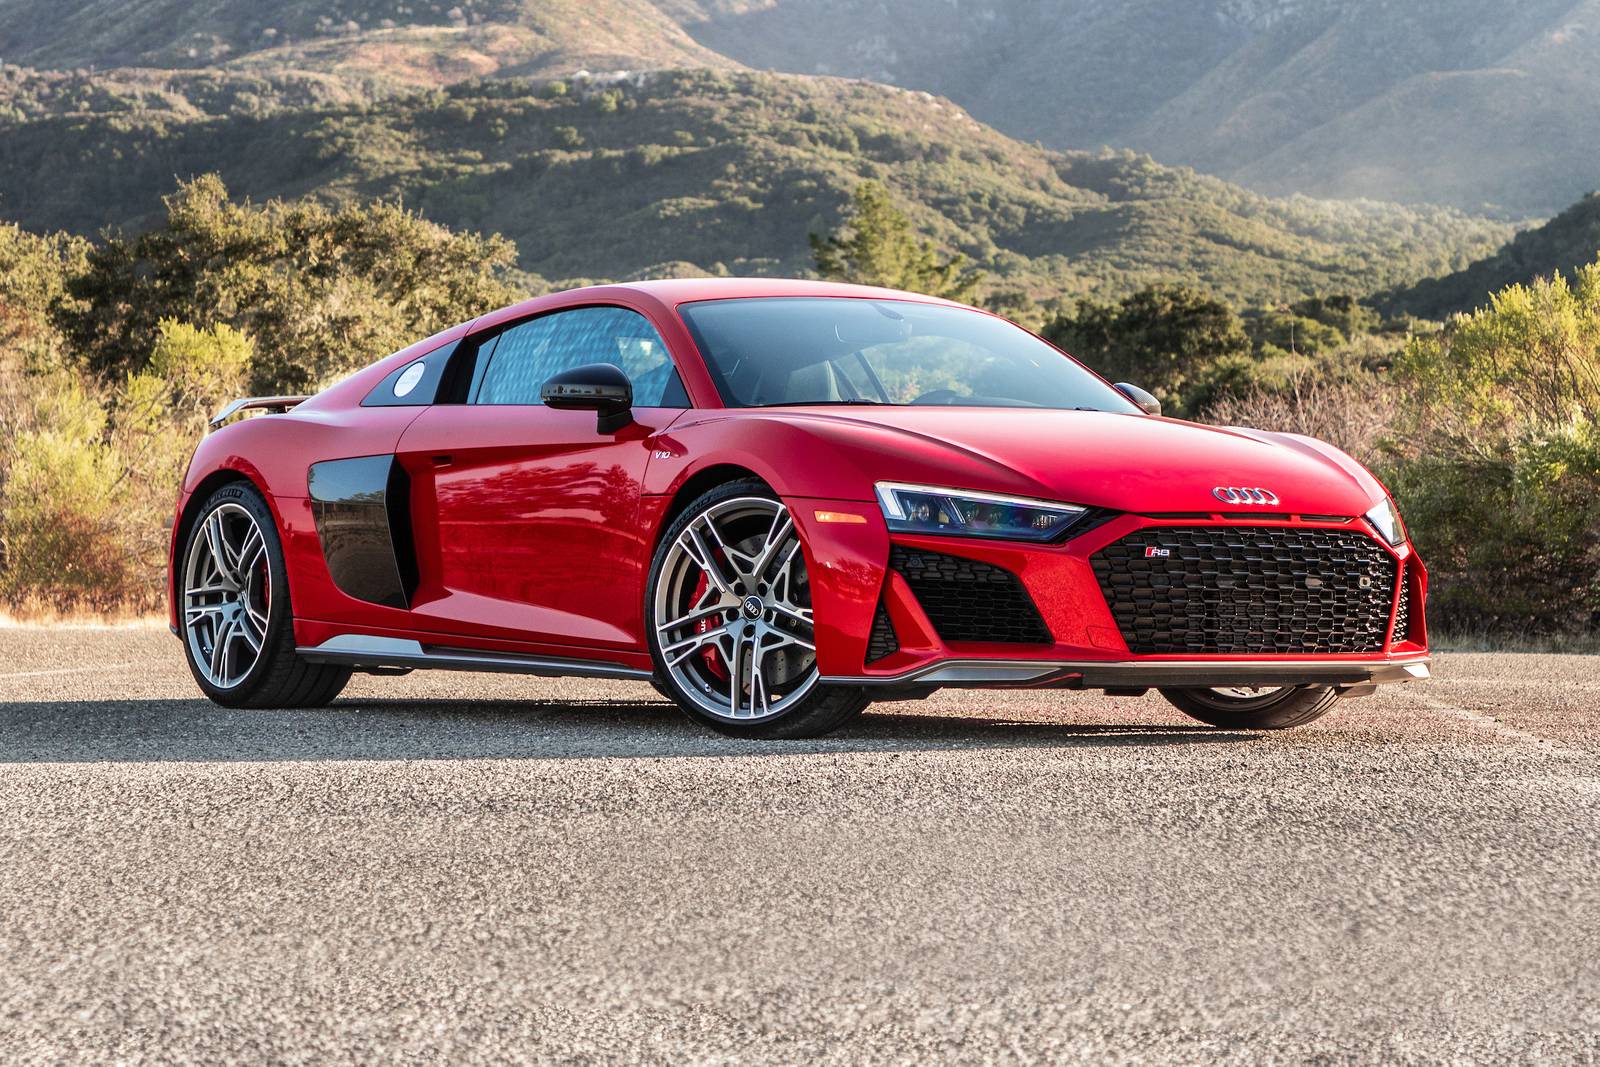 How Much It Cost To Rent Audi R8 In Dubai